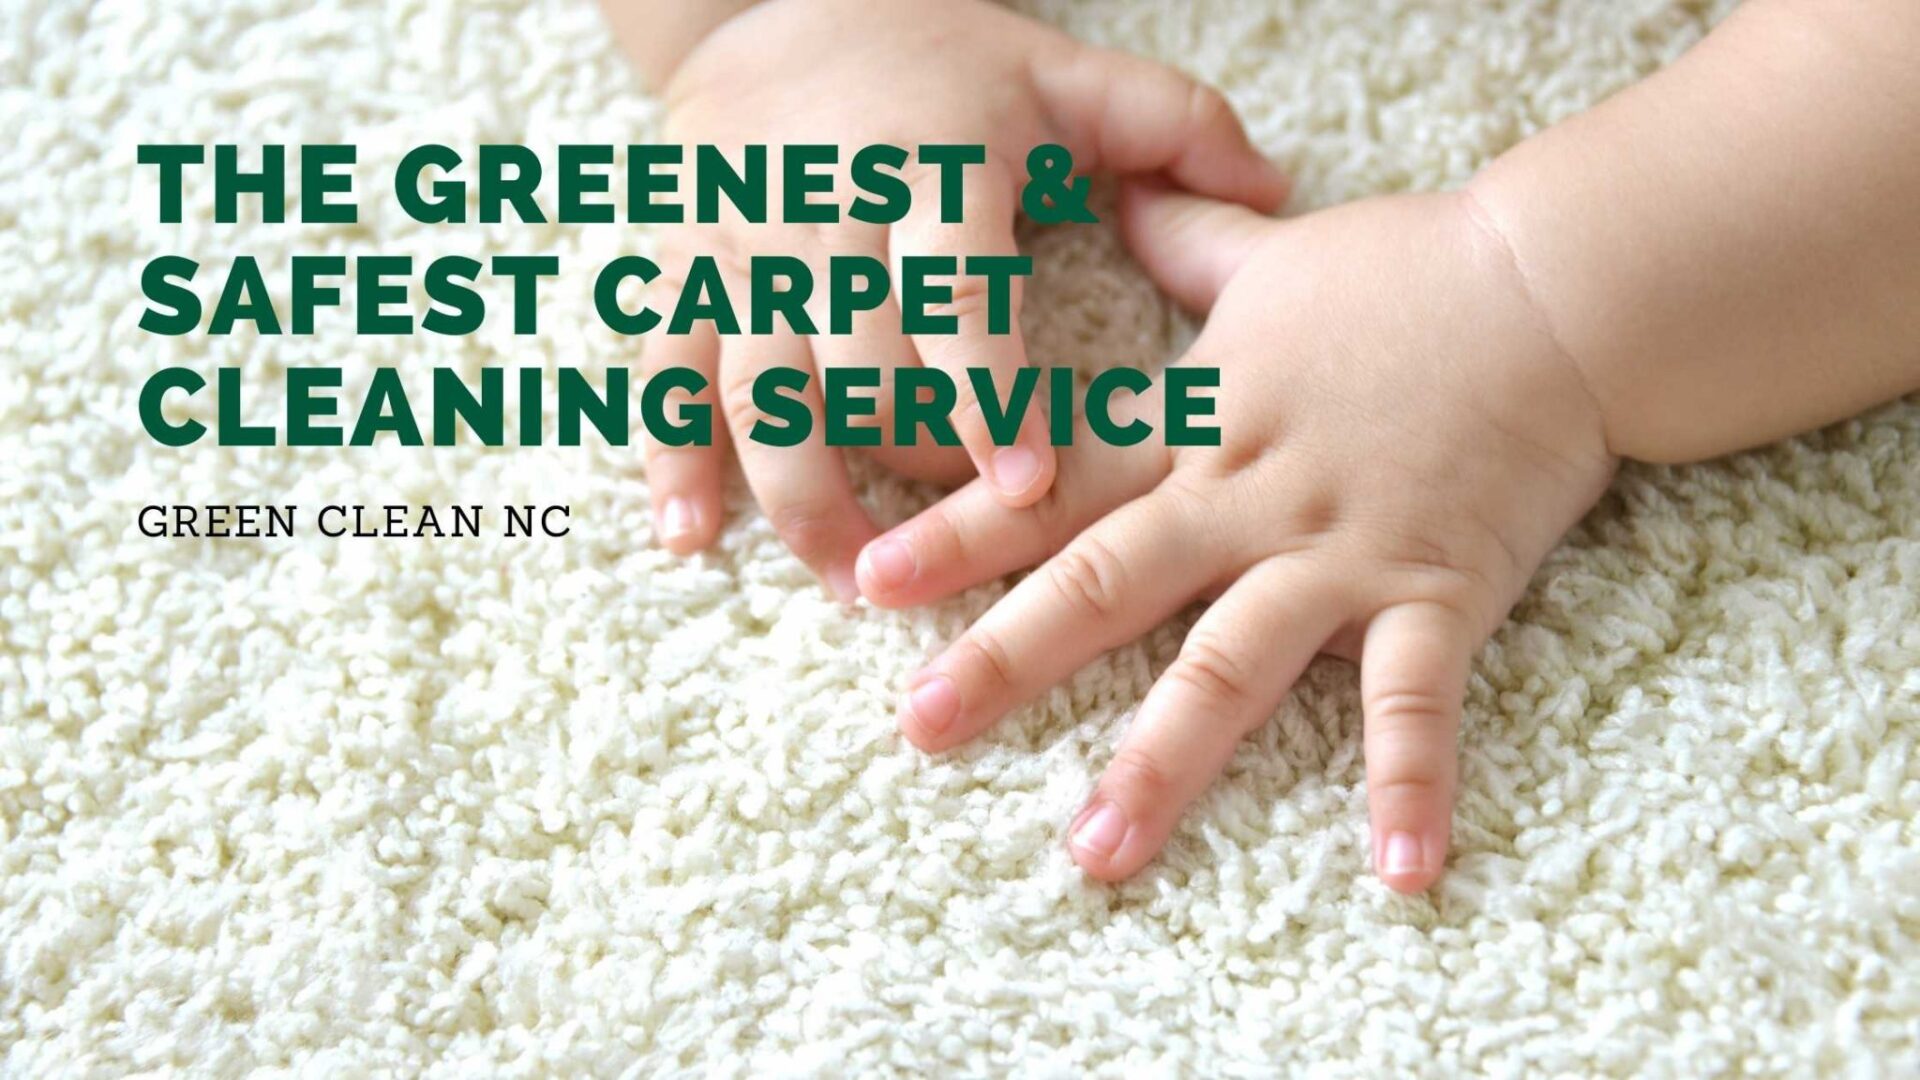 The Greenest & Safest Carpet Cleaning Service